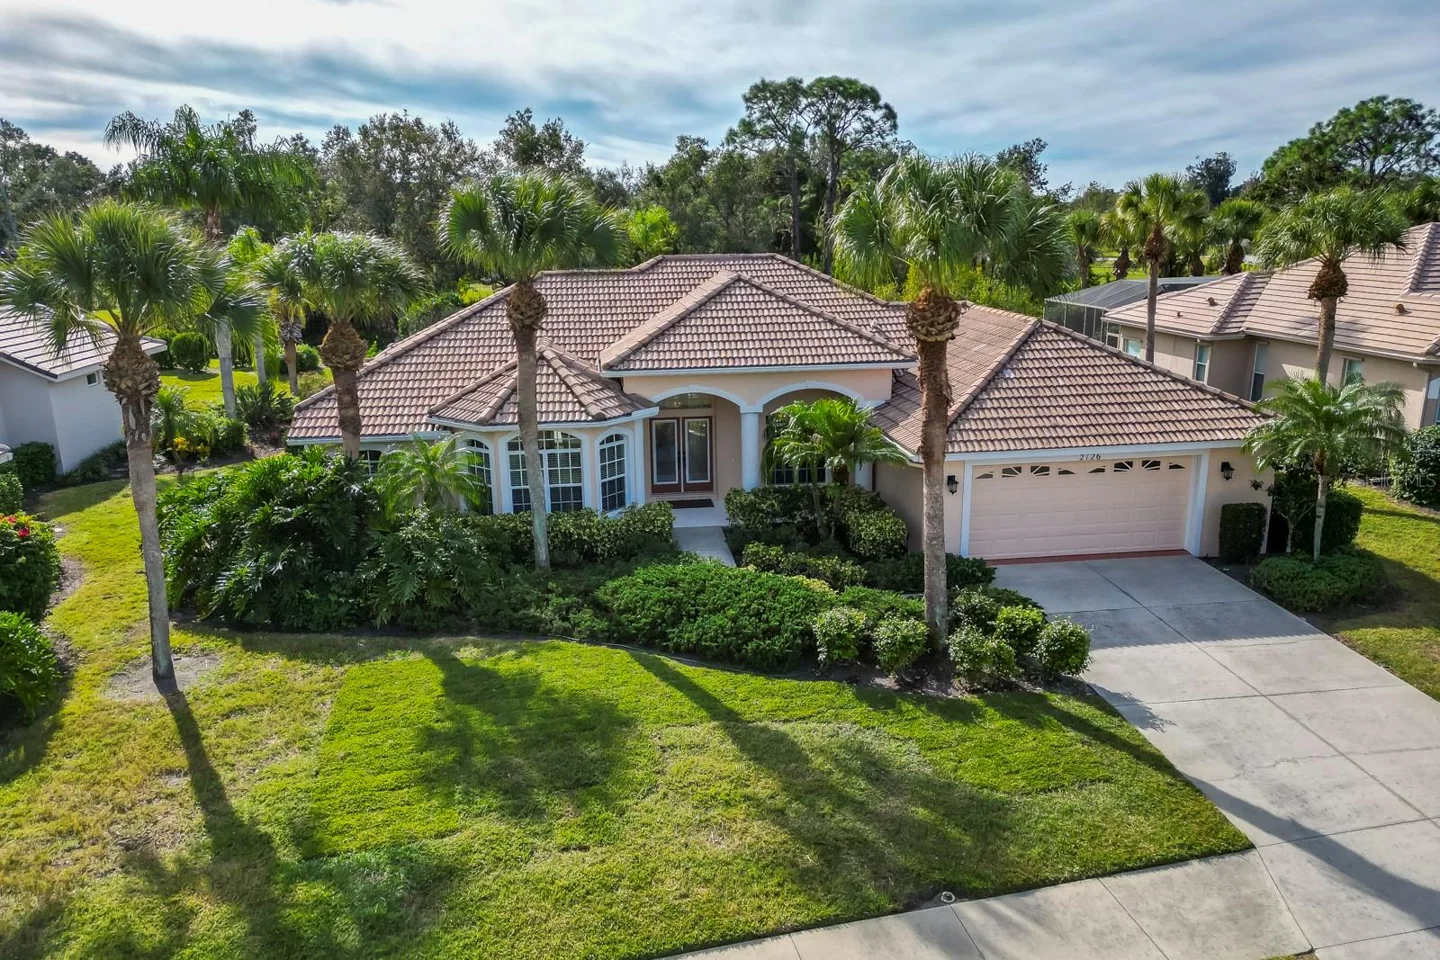 Located in the desired community of Calusa Lakes.